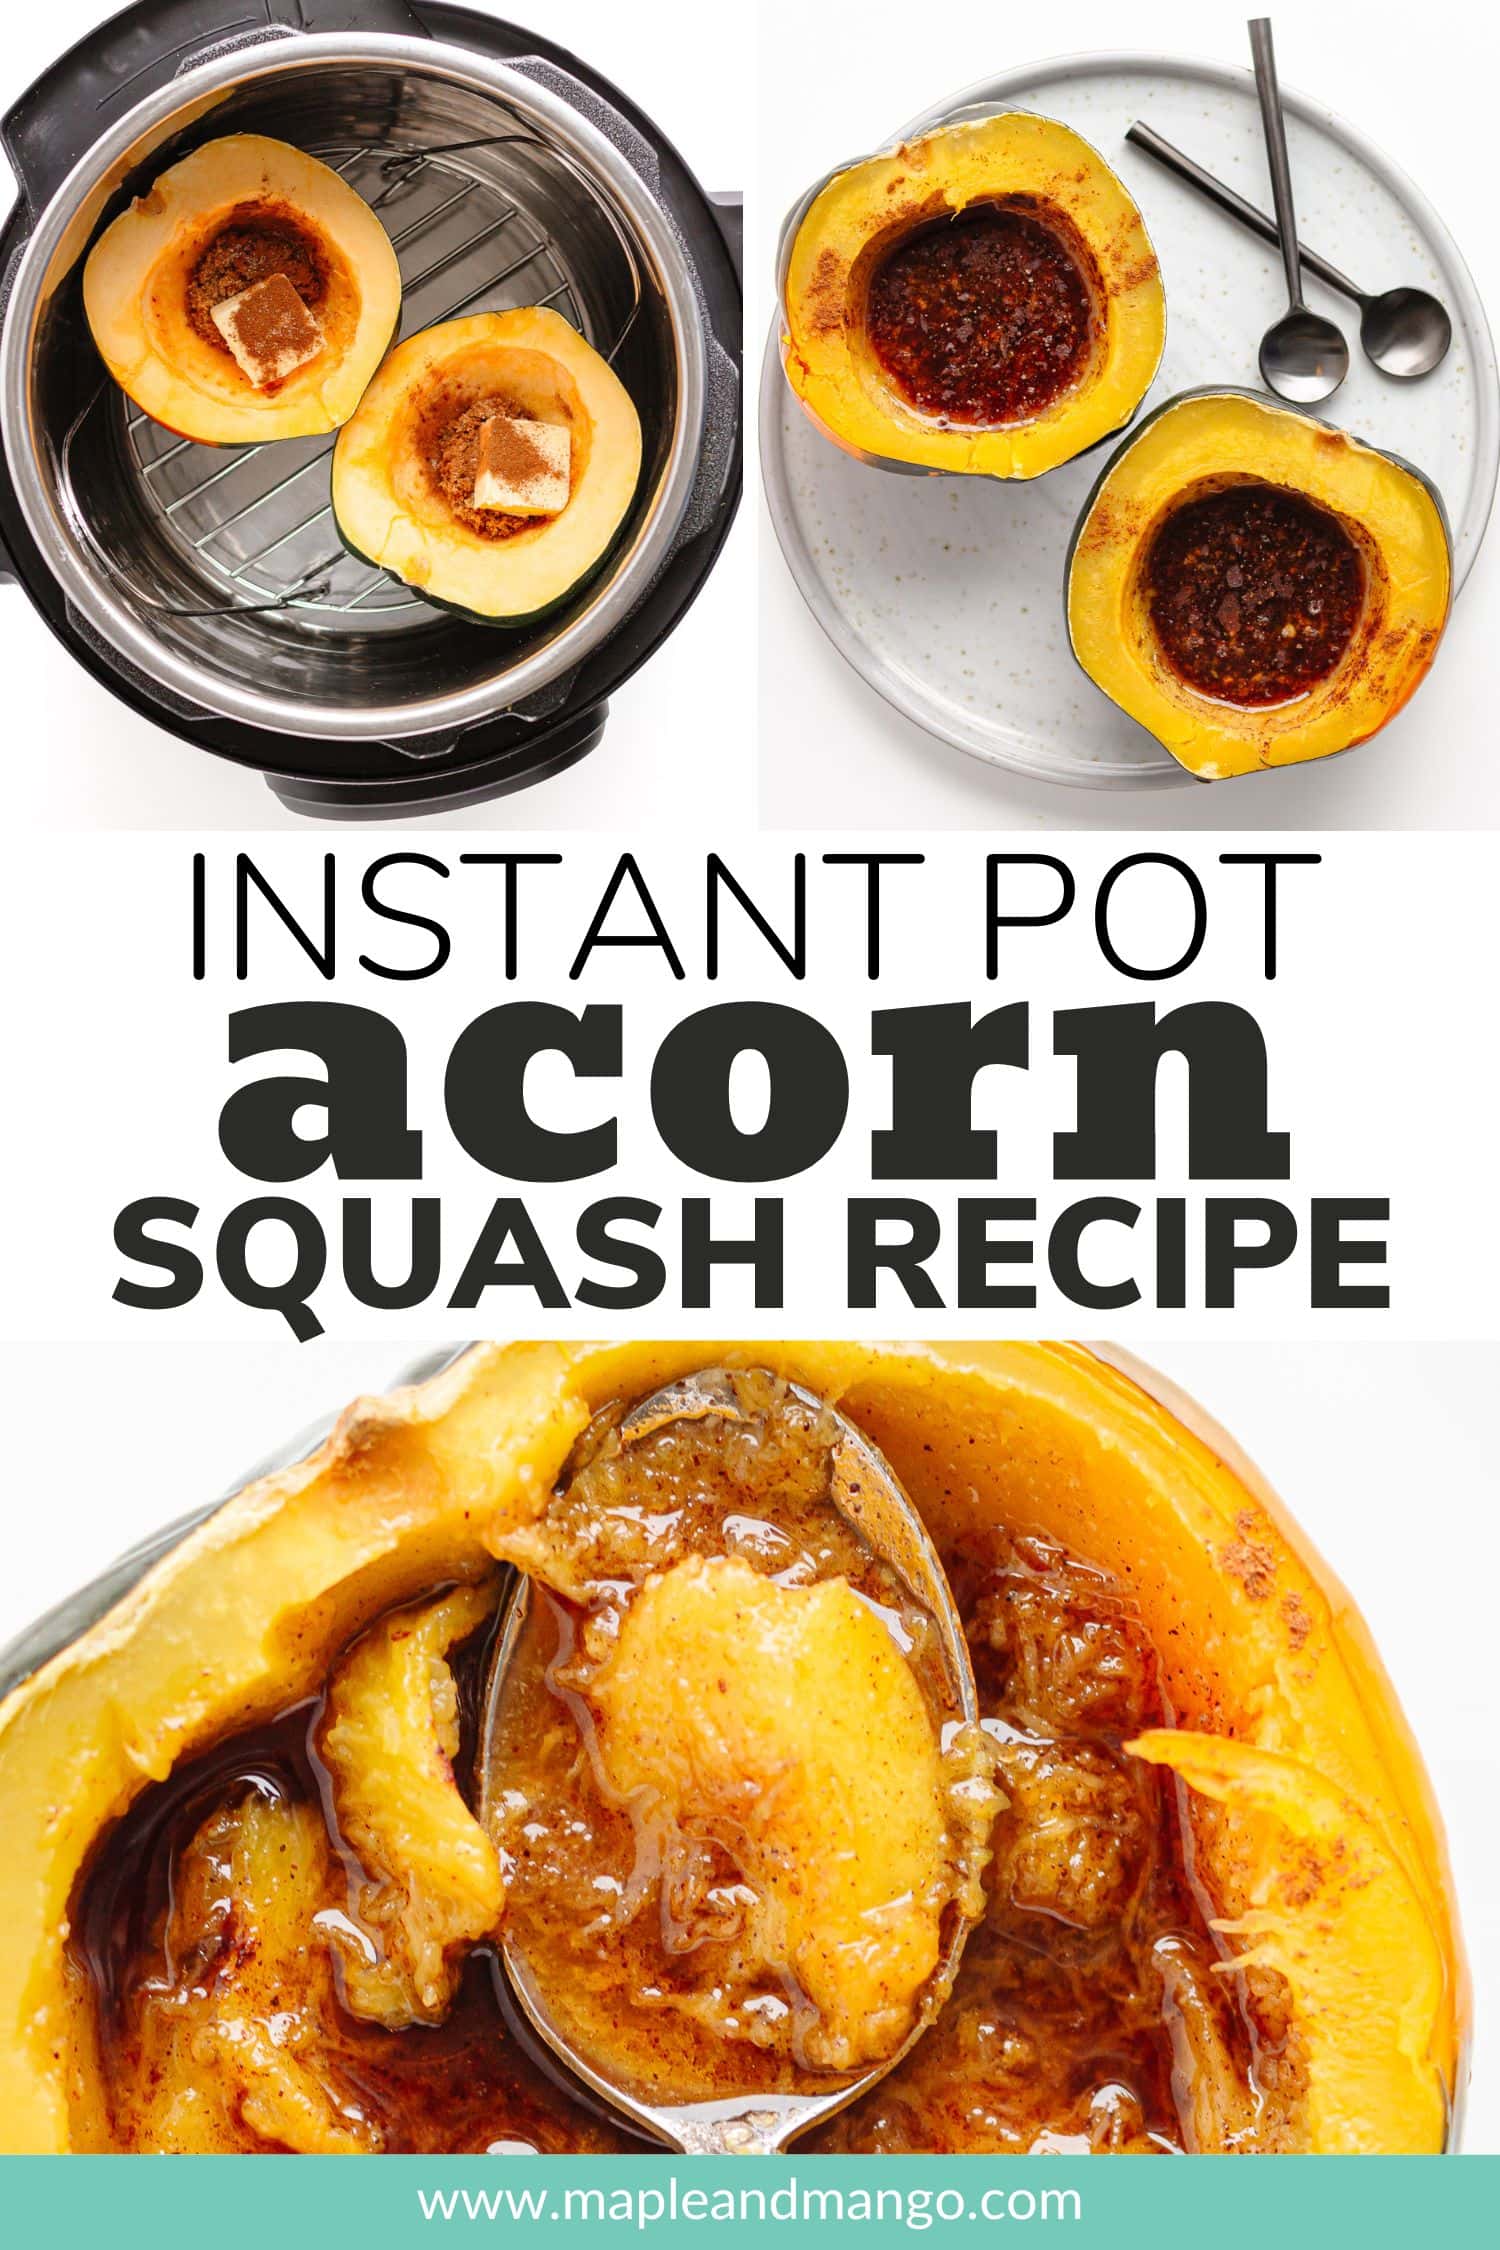 Collage graphic showing various photos of acorn squash with butter and brown sugar and a text overlay that reads "Instant Pot Acorn Squash Recipe".